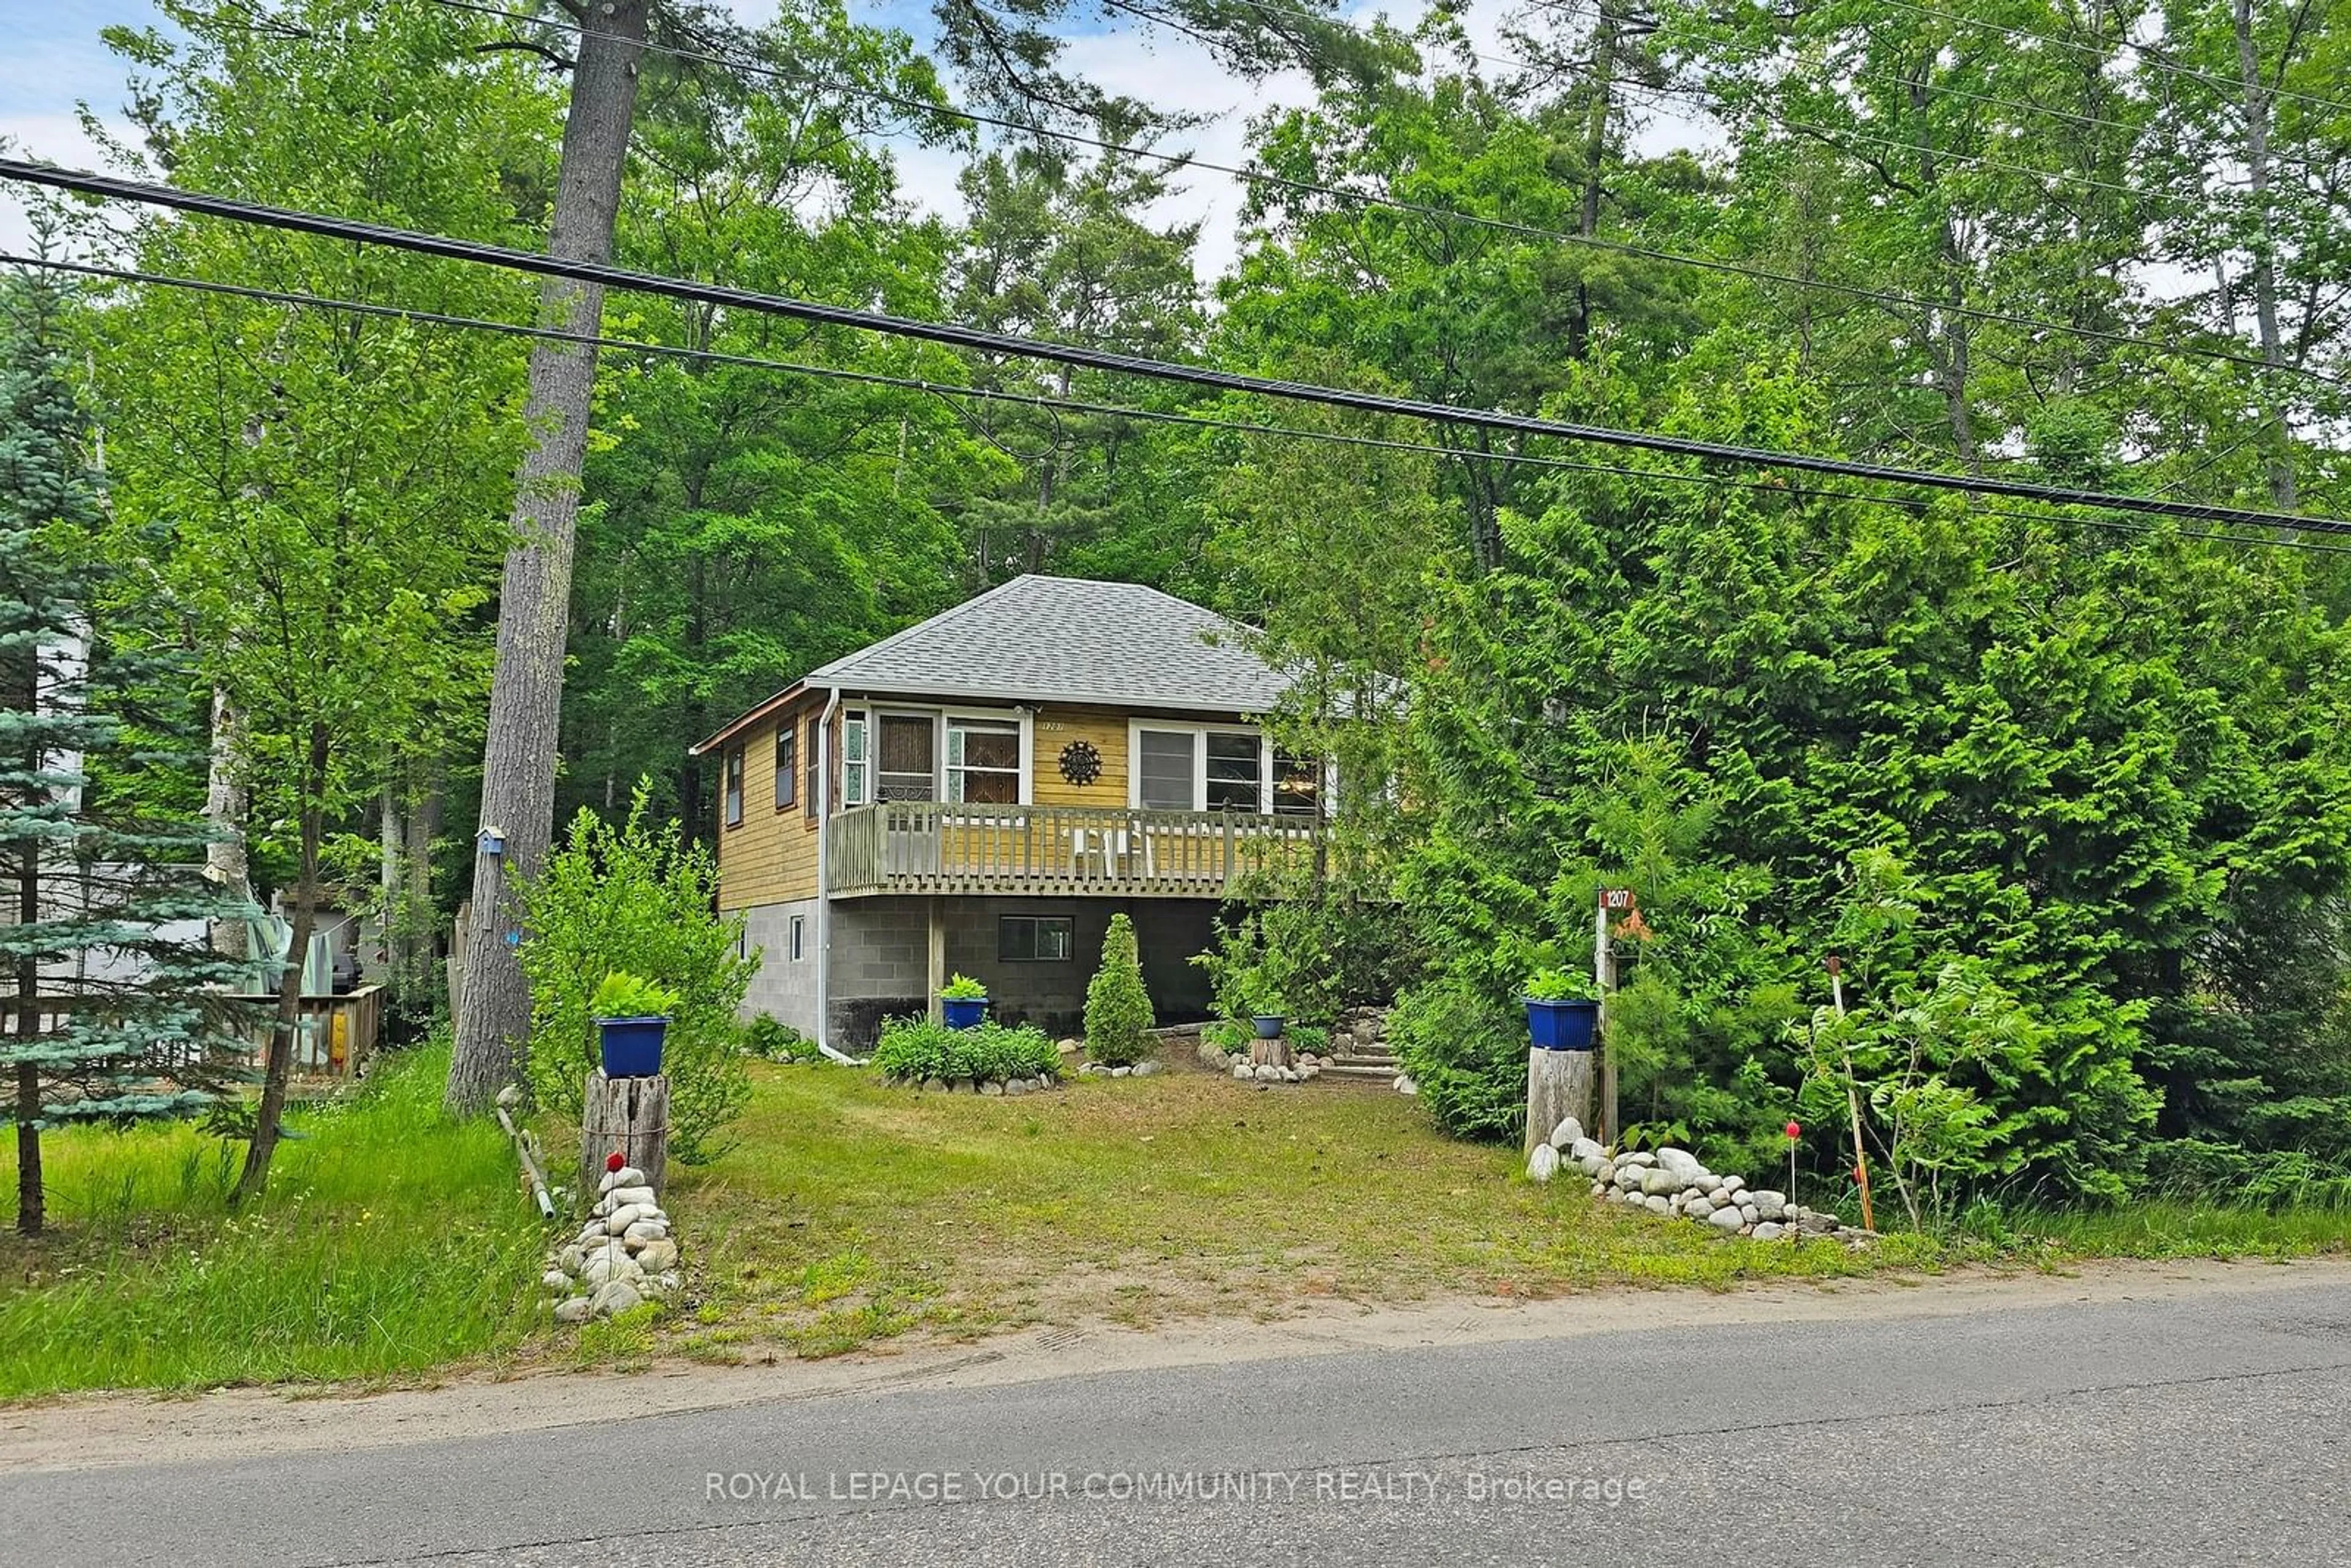 Cottage for 1207 Tiny Beaches Rd, Tiny Ontario L0L 2T0